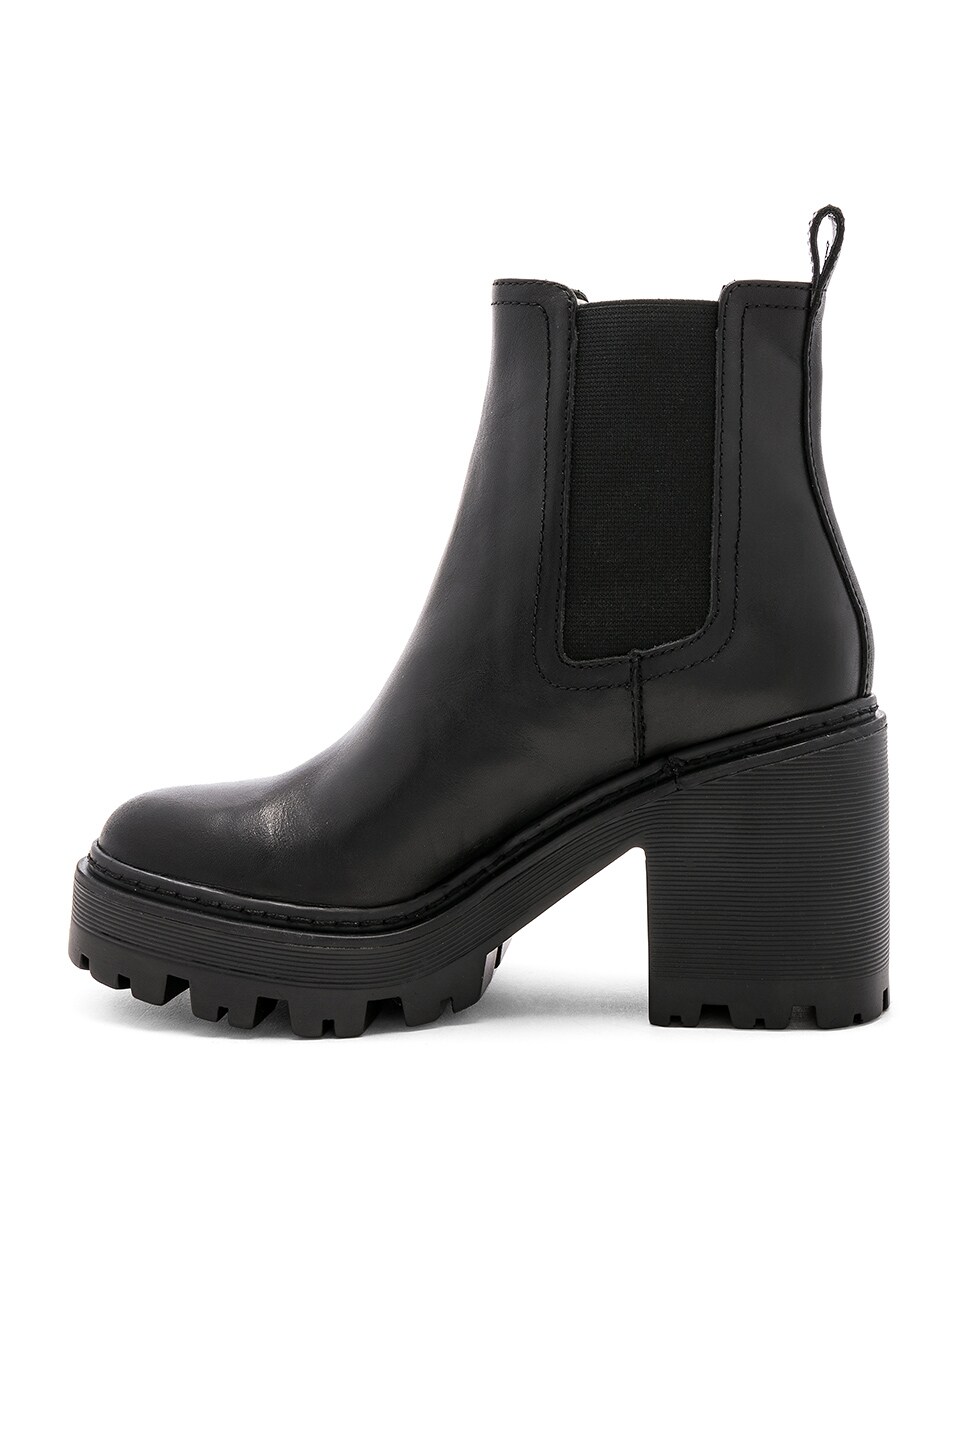 KENDALL + KYLIE Jett Bootie in Black Leather | REVOLVE